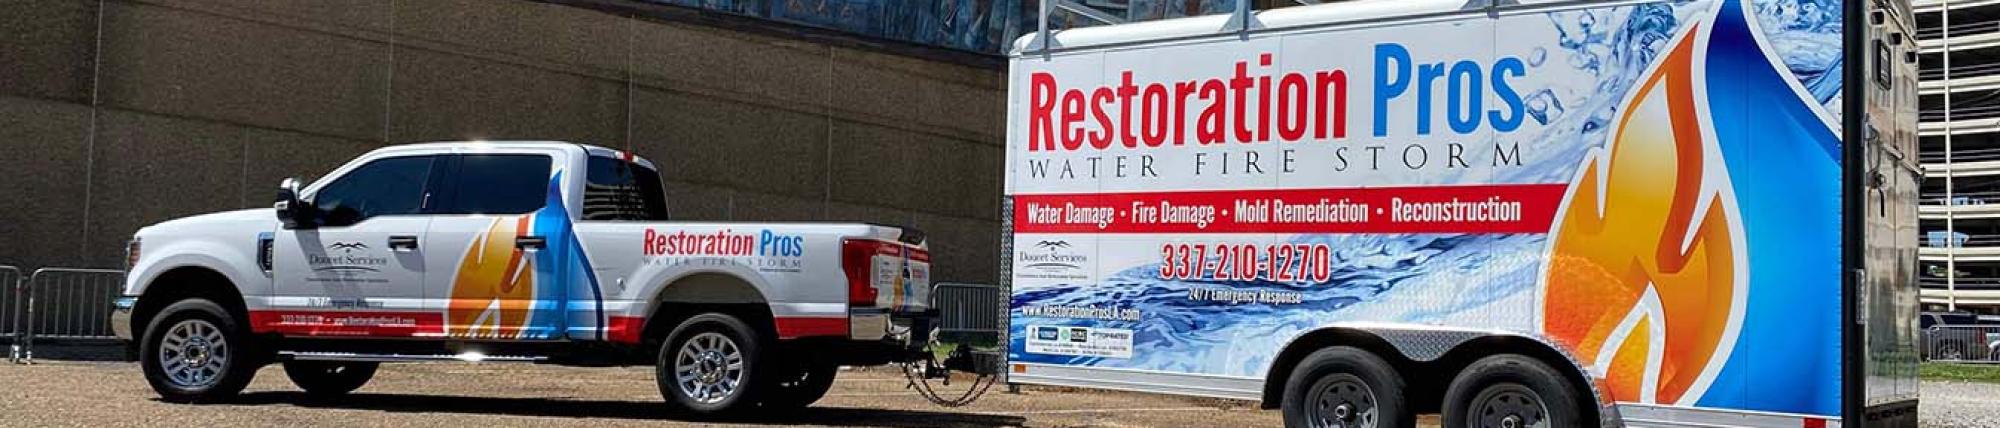 image of water mitigation and restoration company truck